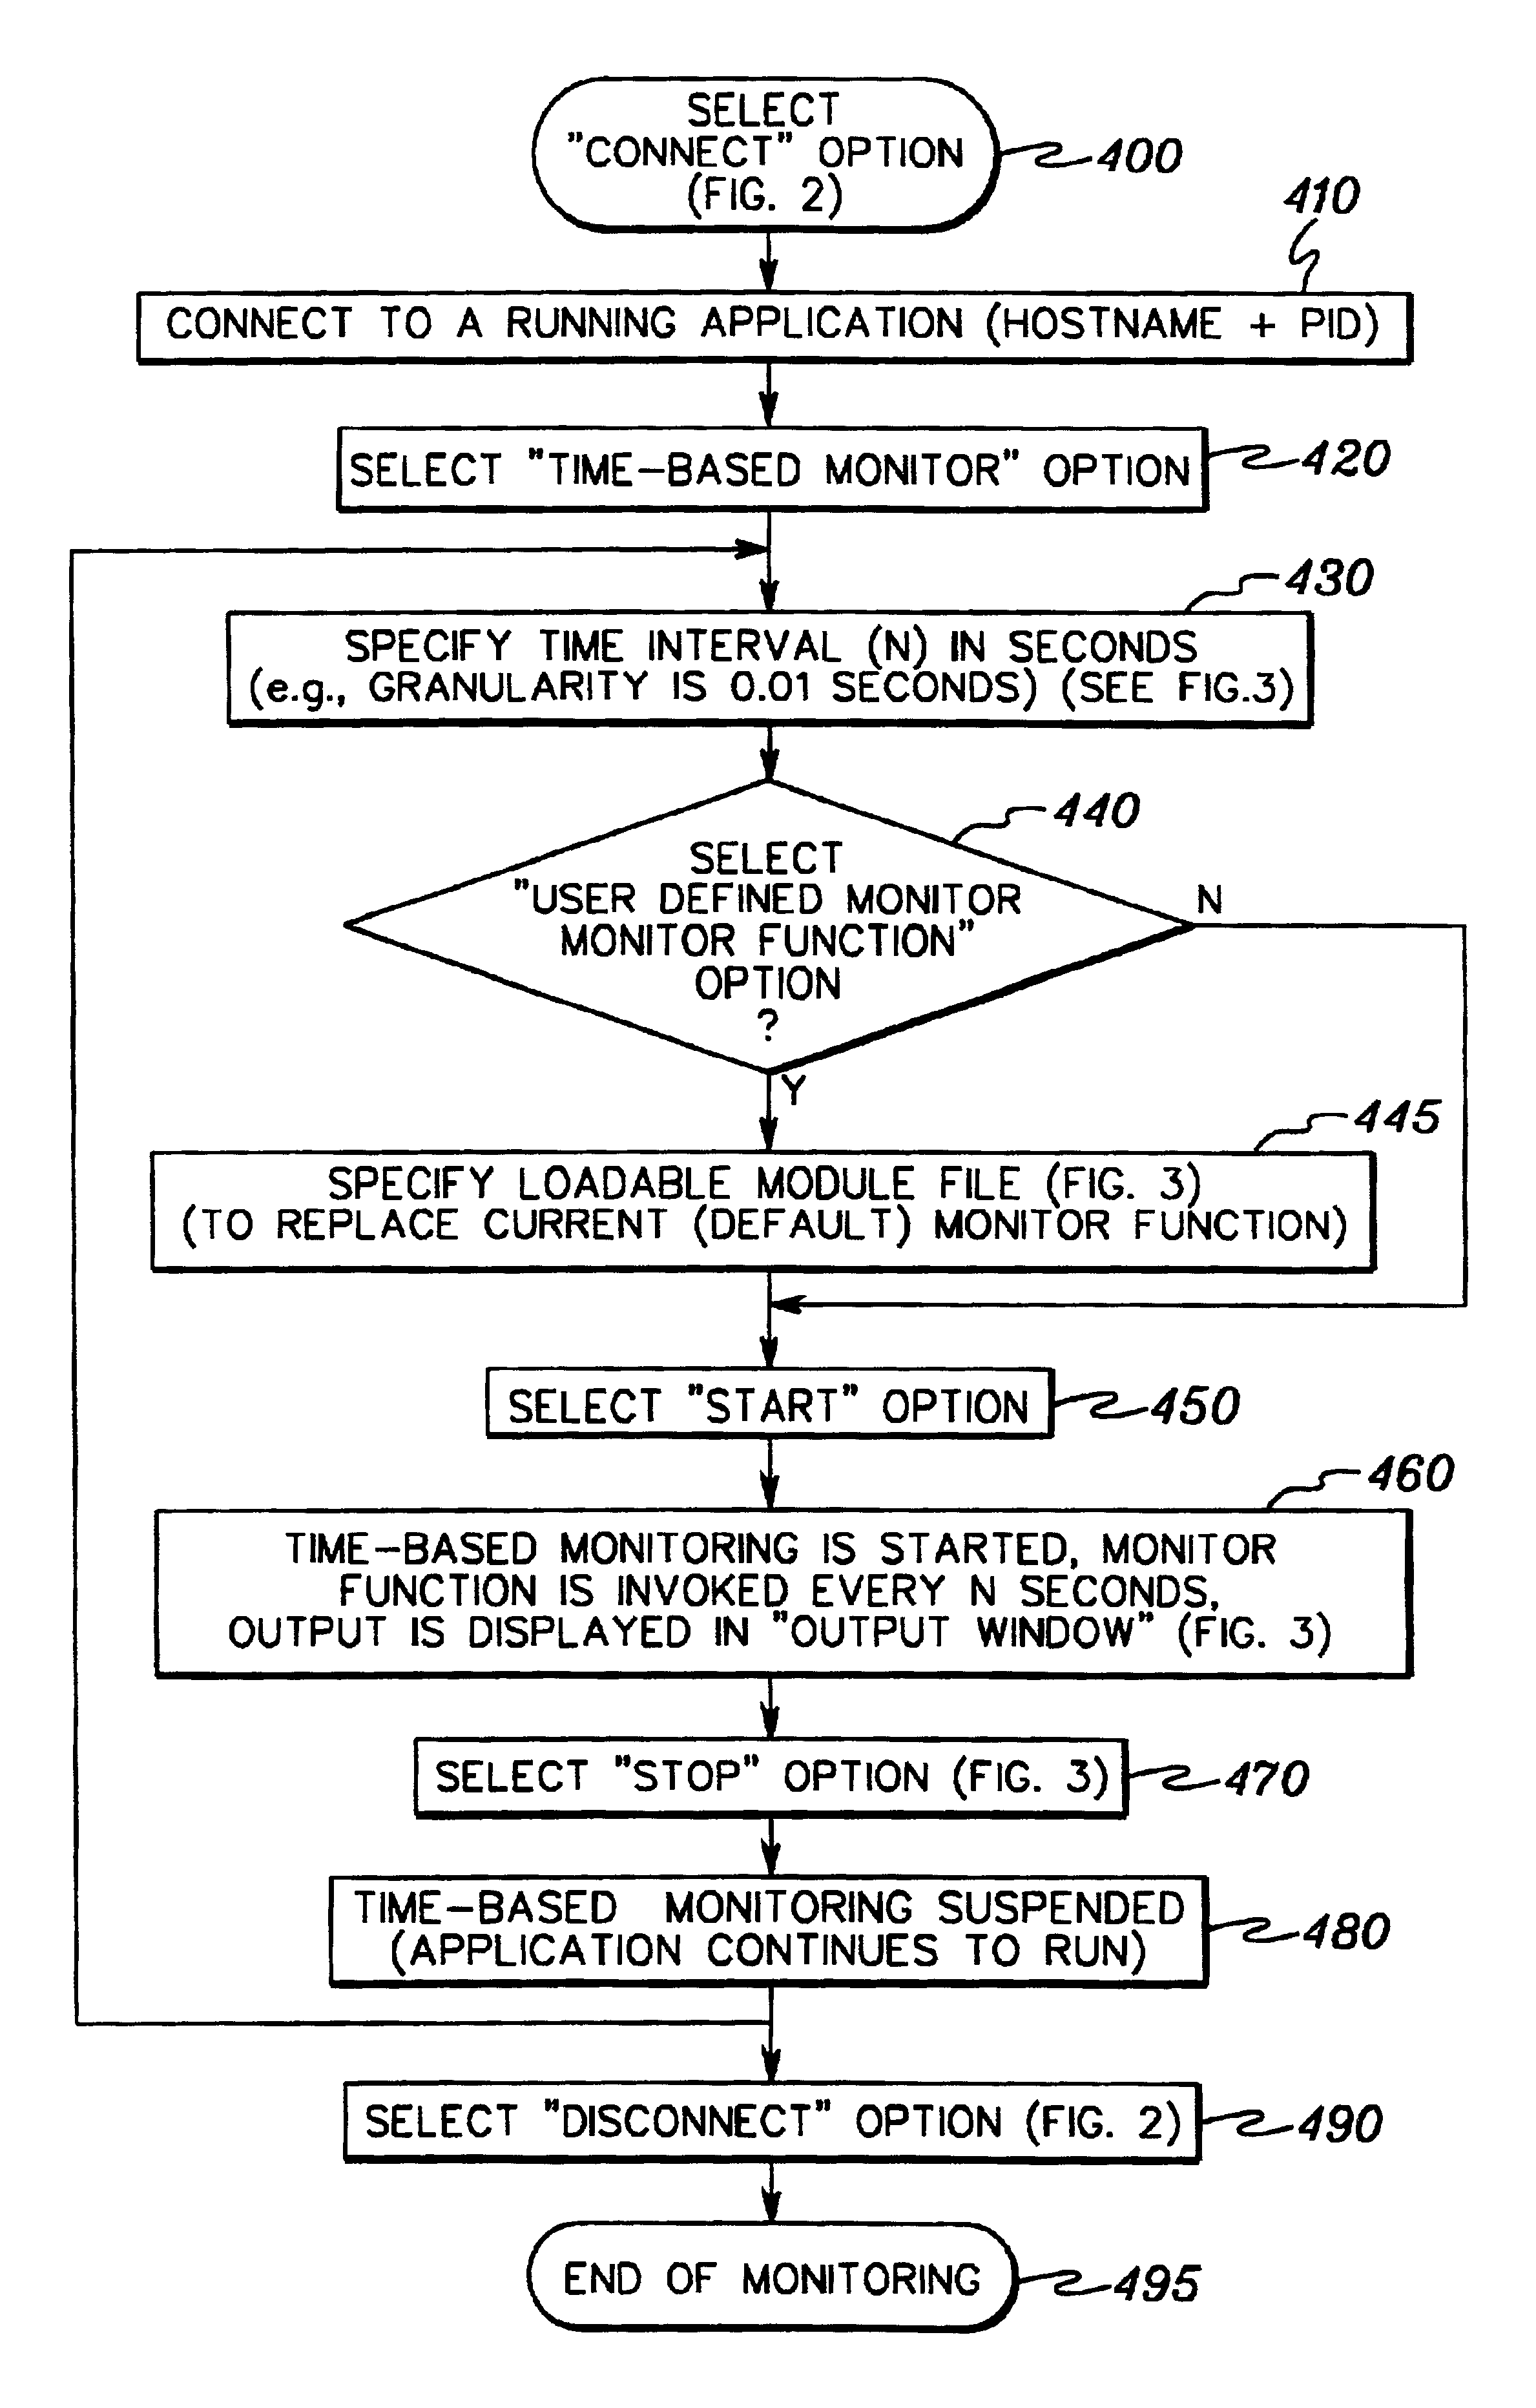 Time-interval based monitor function for dynamic insertion into and removal from a running application